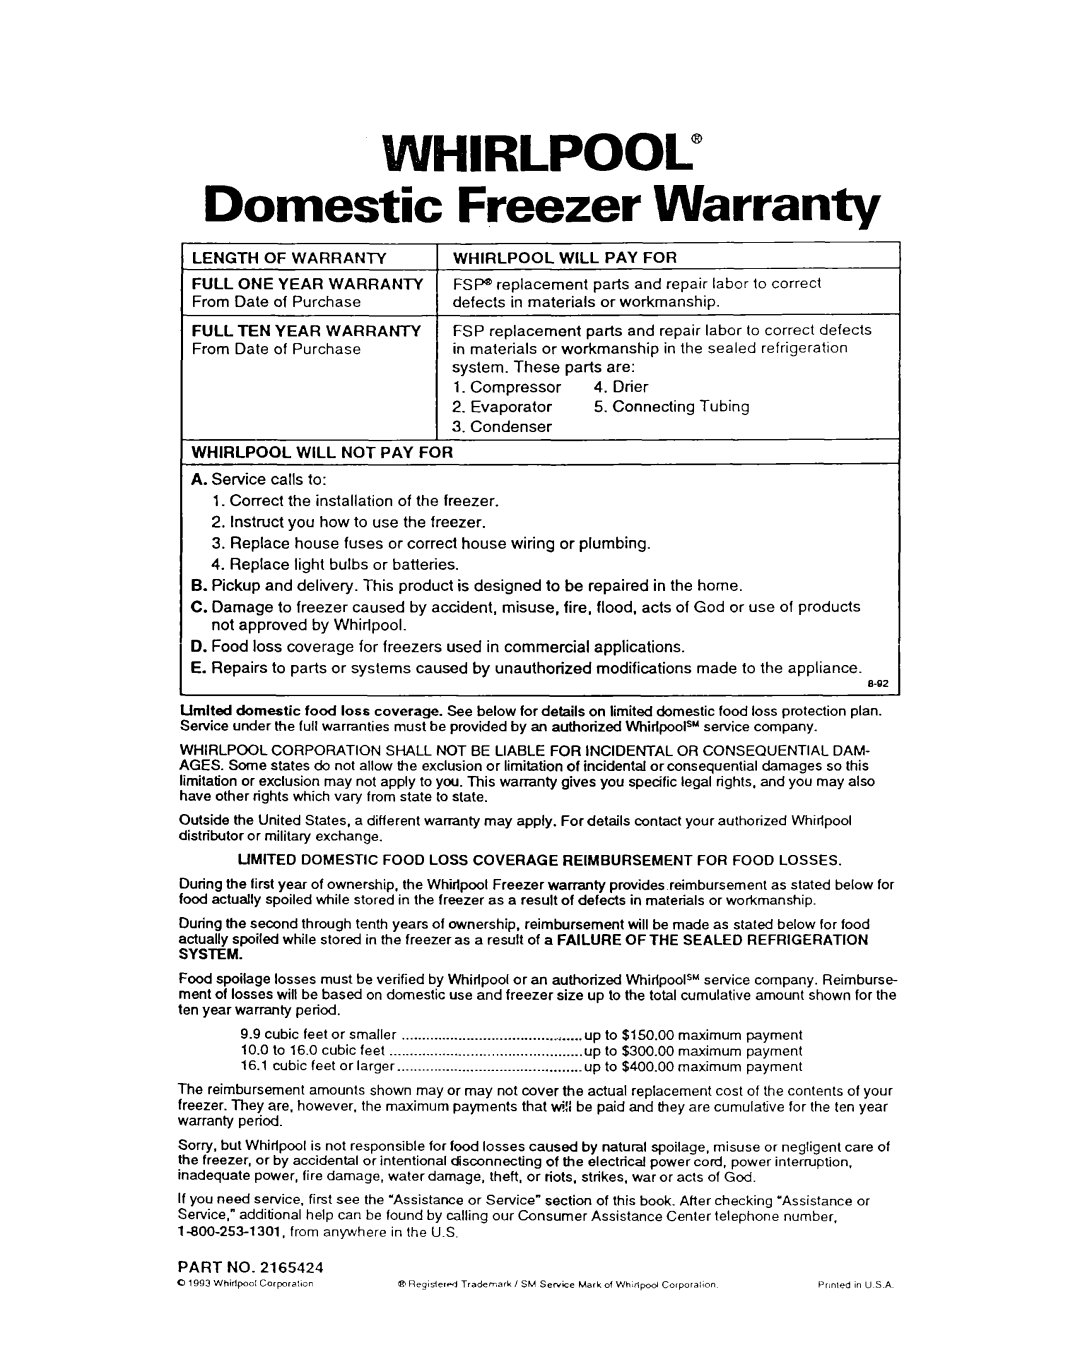 Whirlpool COMPACT FREEZER warranty HIRLPOOL” Domestic Freezer Warranty, Length Of Warranty, Whirlpool Will Not Pay For 